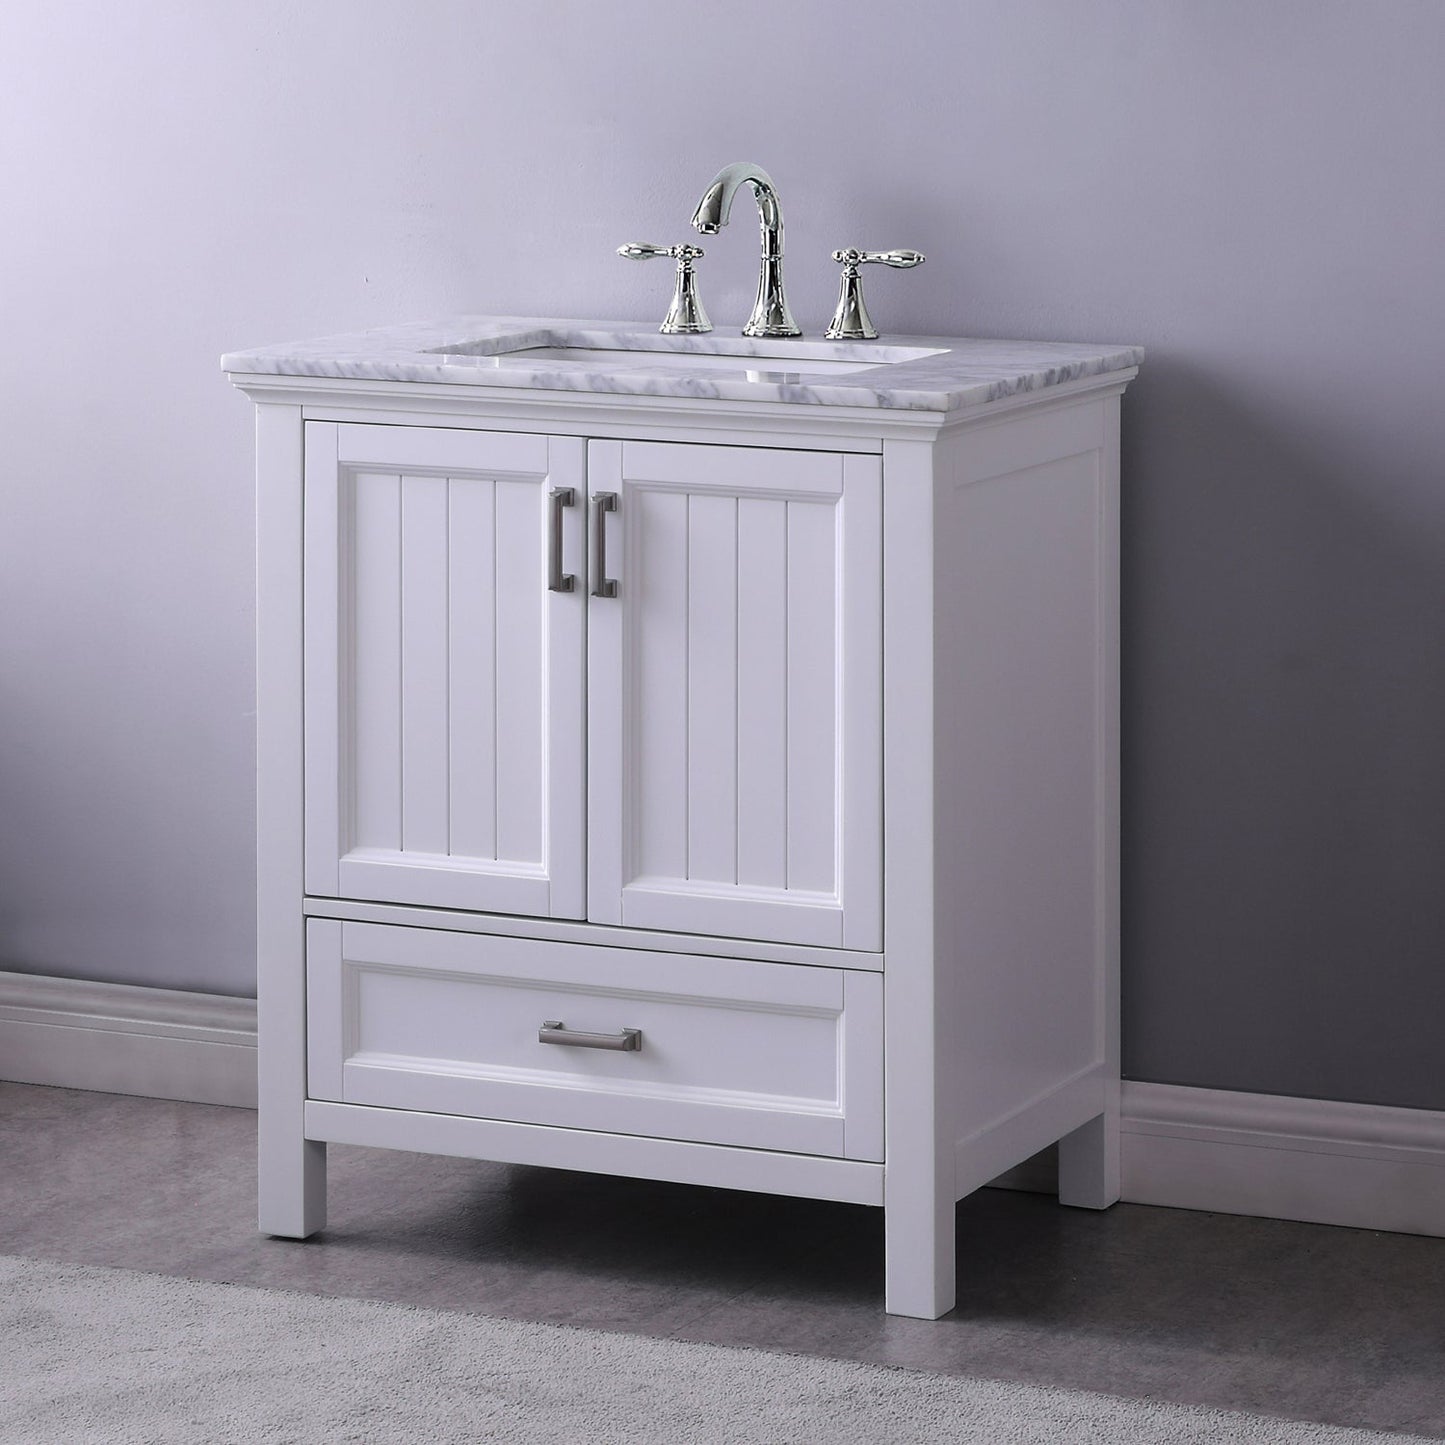 Isla 30" Single Bathroom Vanity Set in White and Carrara White Marble Countertop without Mirror